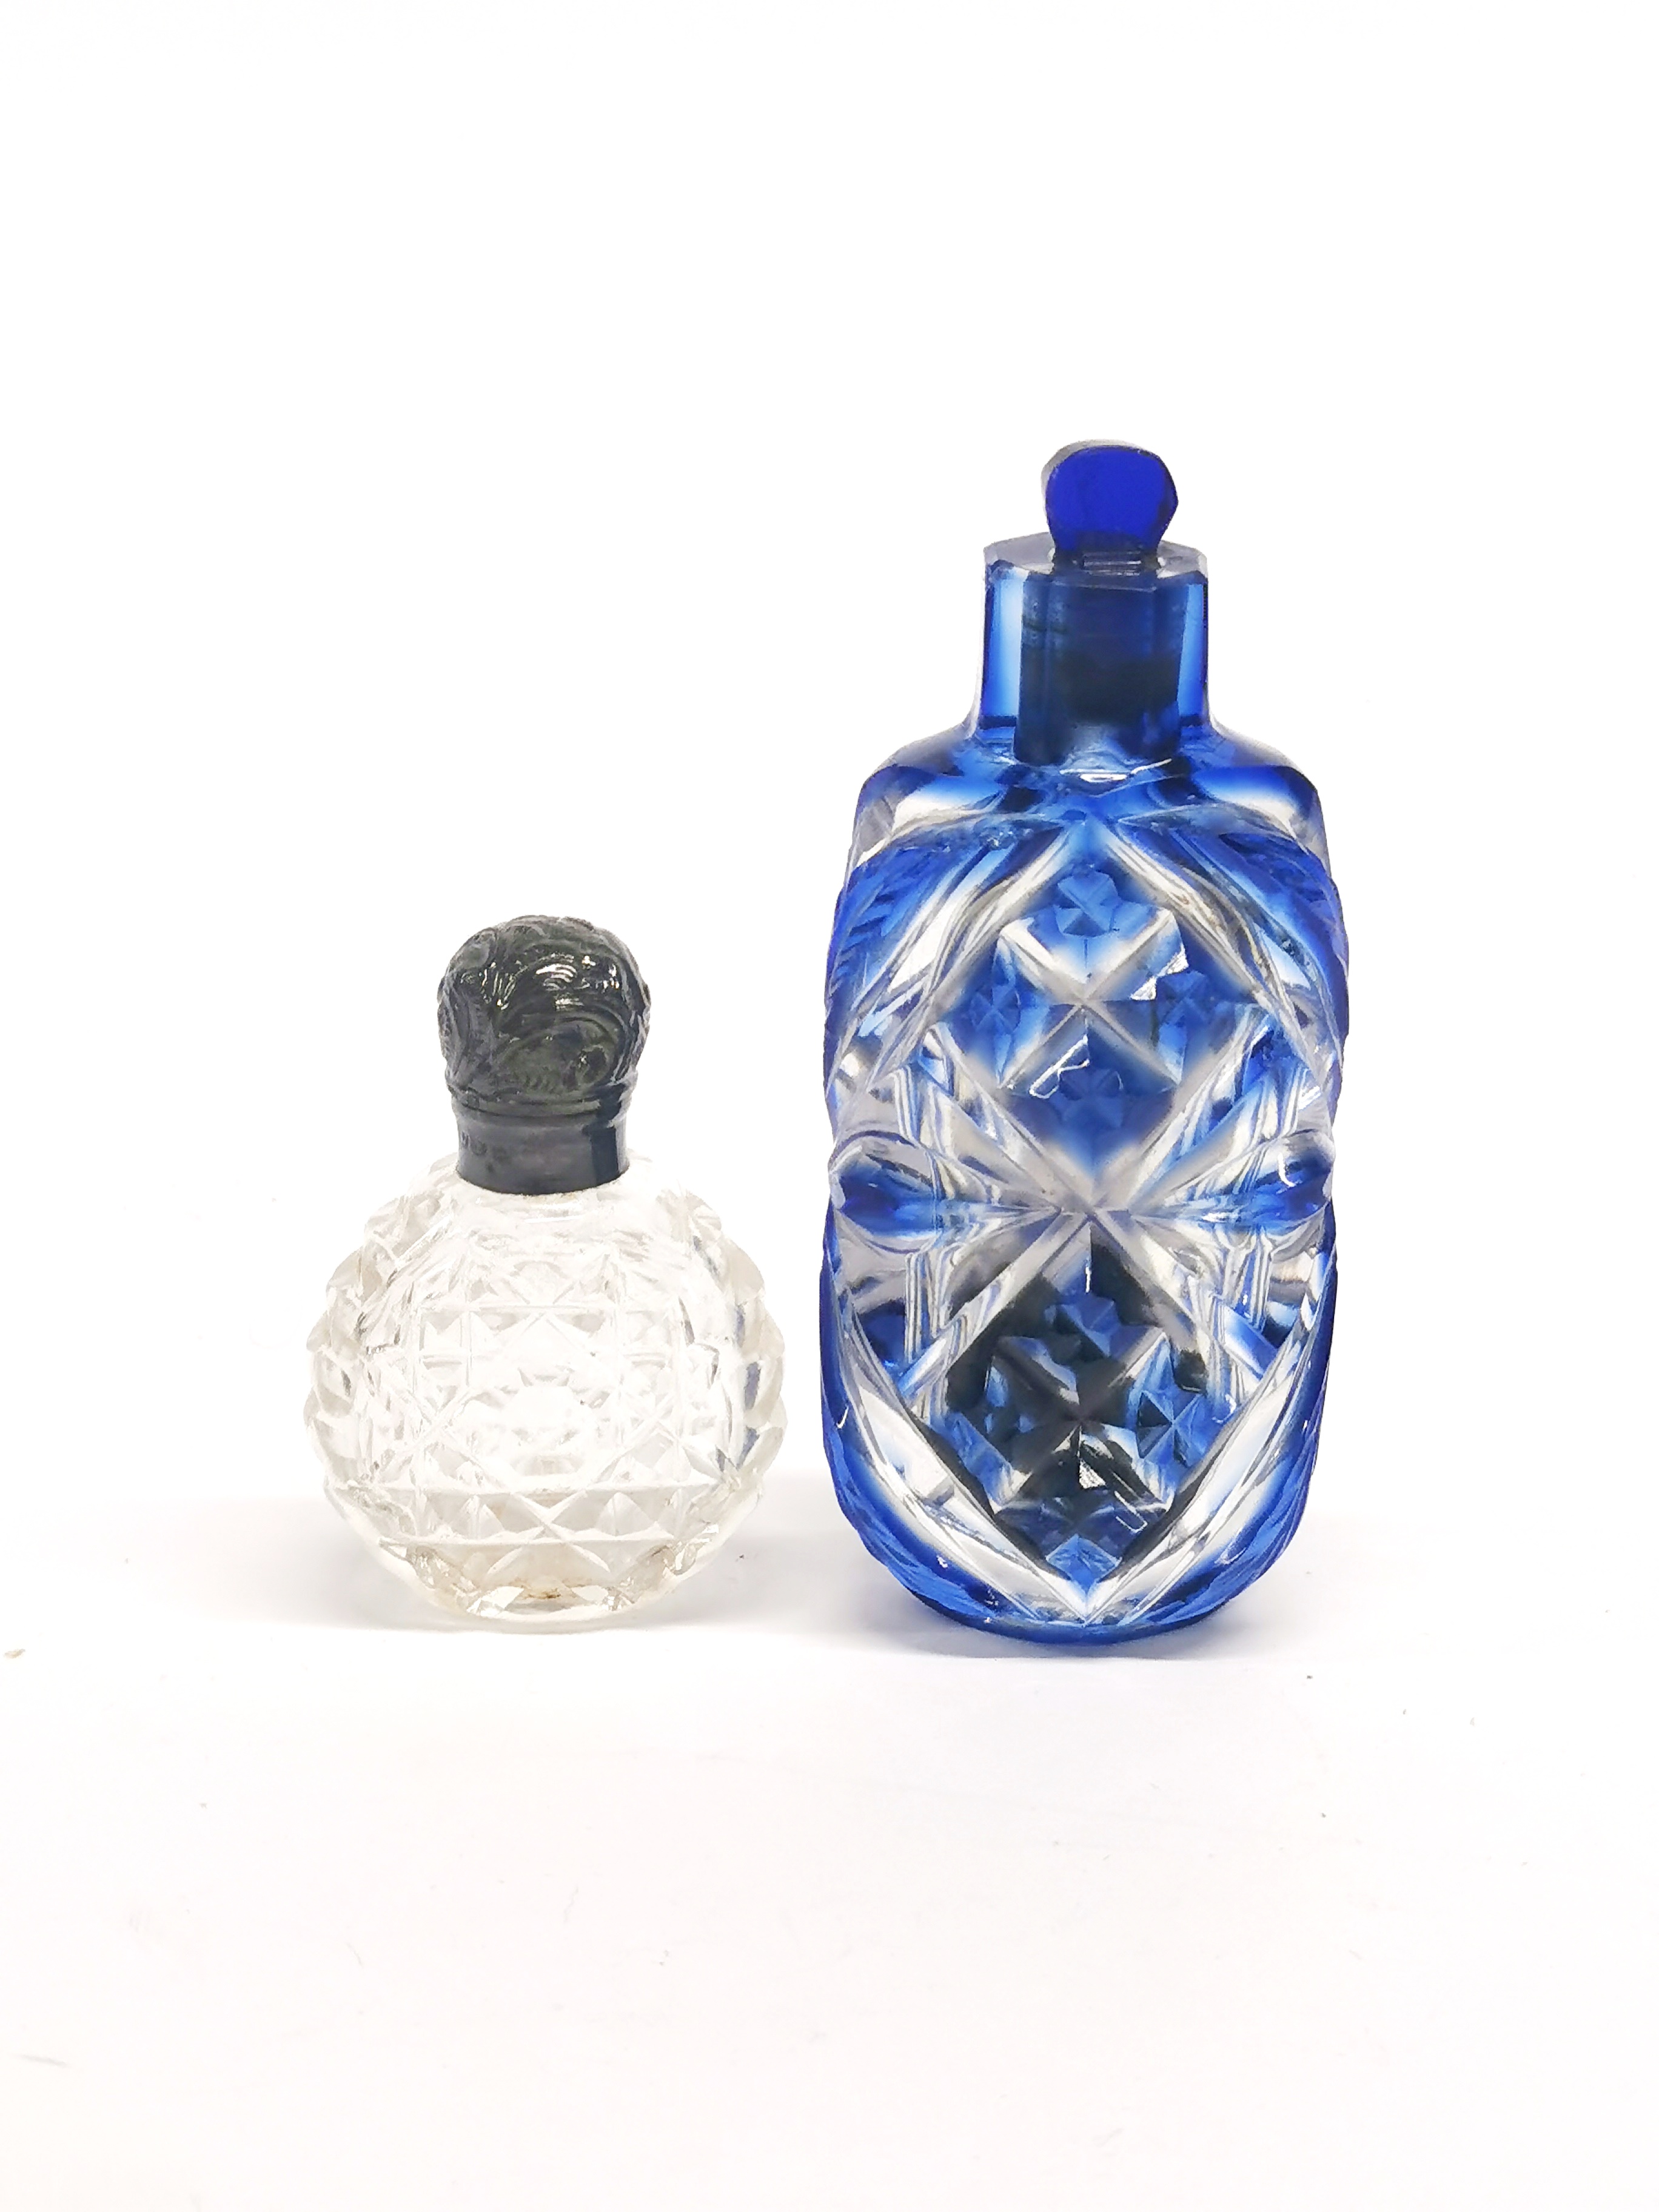 A Victorian cut glass perfume bottle and a hallmarked silver topped perfume bottle.